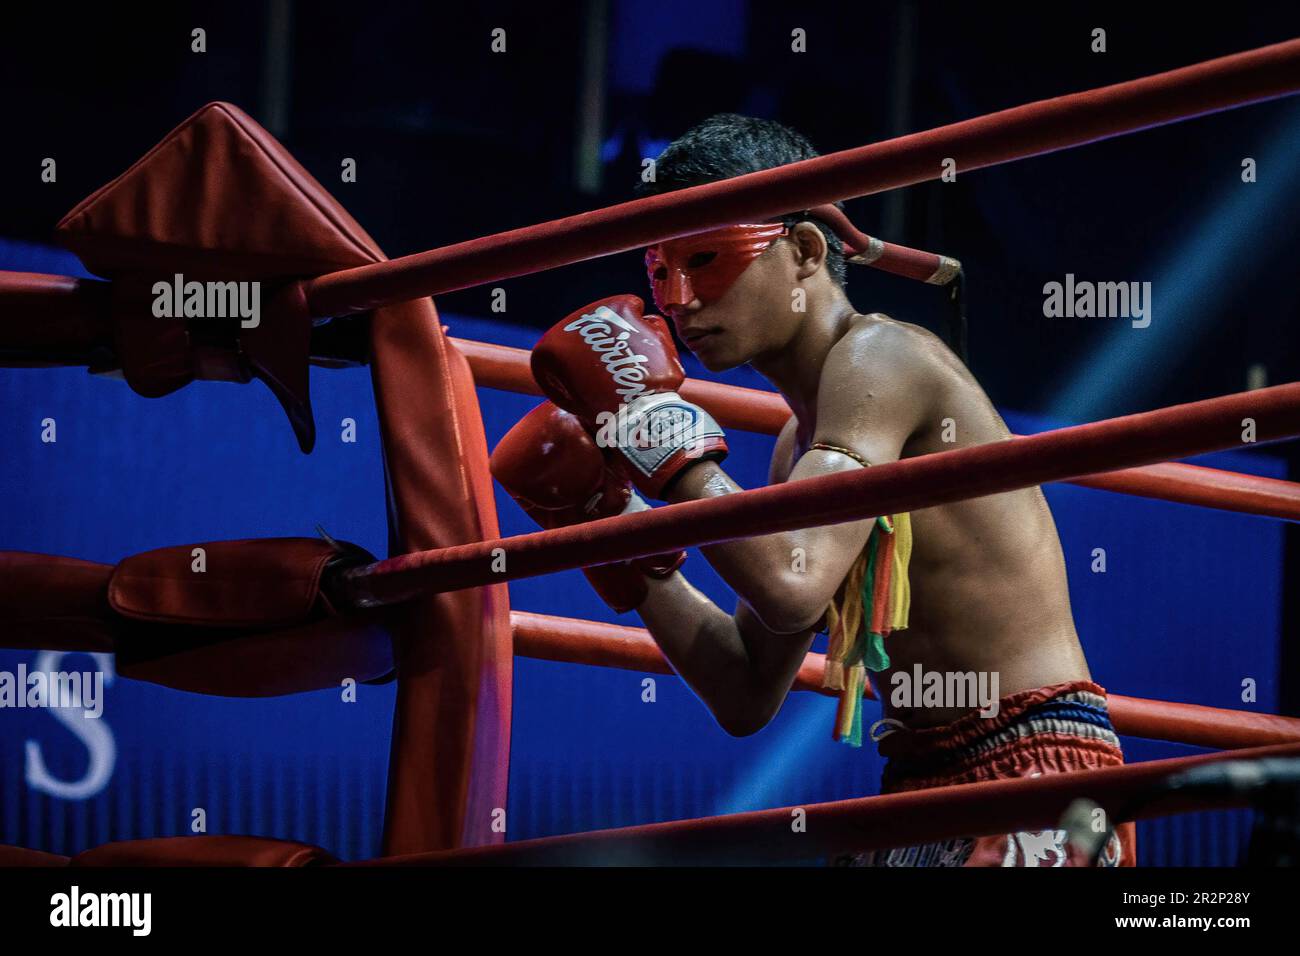 Bangkok, Thailand. 07th Nov, 2022. A Muay Thai boxer performs 'Wai Kru' a ritual ceremony before engaging in battle which is a thank you and blessing to show deep respect to one's coaches, training partners, and family, at Bangkok's Rajadamnern stadium. Muay Thai fights at Thailand's iconic boxing Rajadamnern stadium, the dream stage for competitors and it is favourite for combat sports all over the world. (Photo by Nathalie Jamois/SOPA Images/Sipa USA) Credit: Sipa USA/Alamy Live News Stock Photo